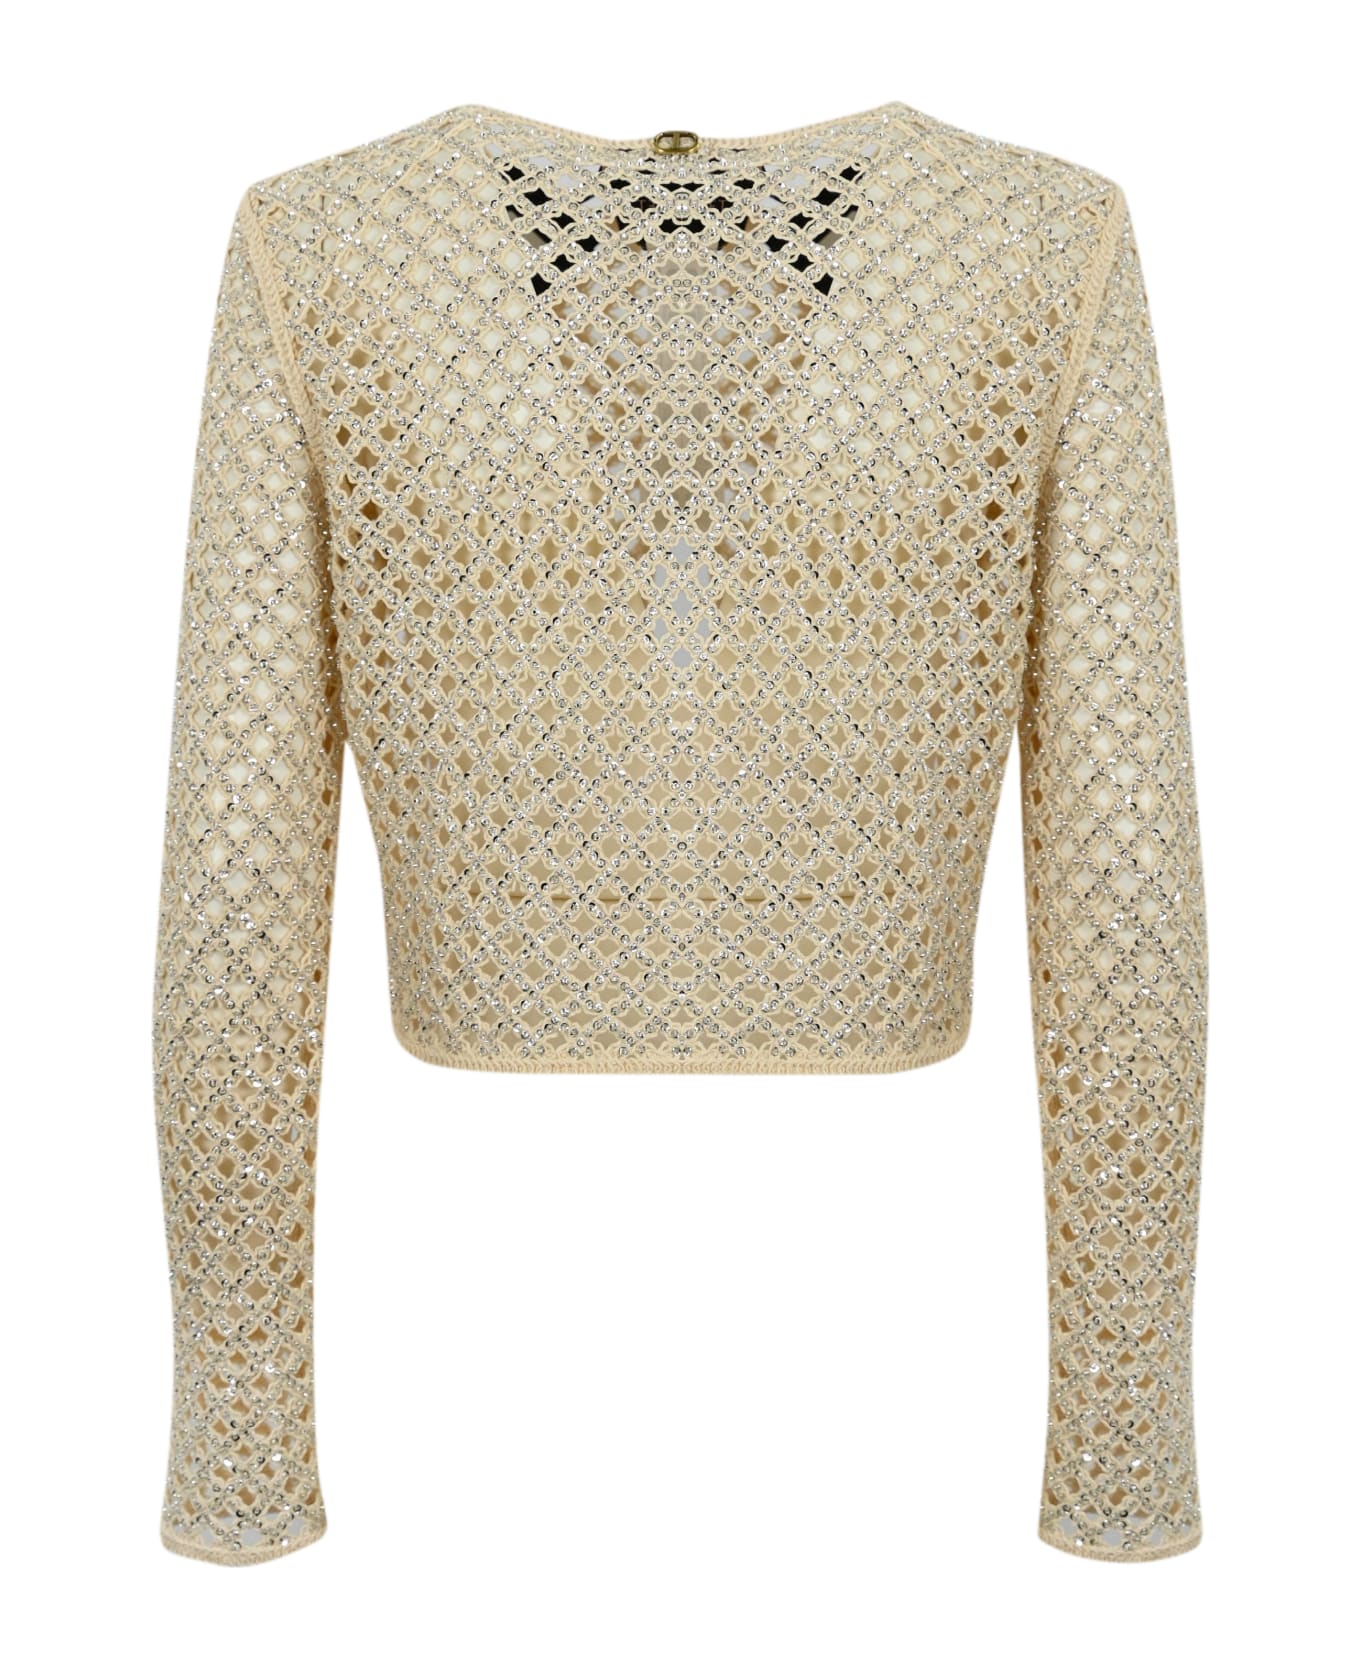 TwinSet Mesh Cardigan With Beads And Rhinestones - Beige